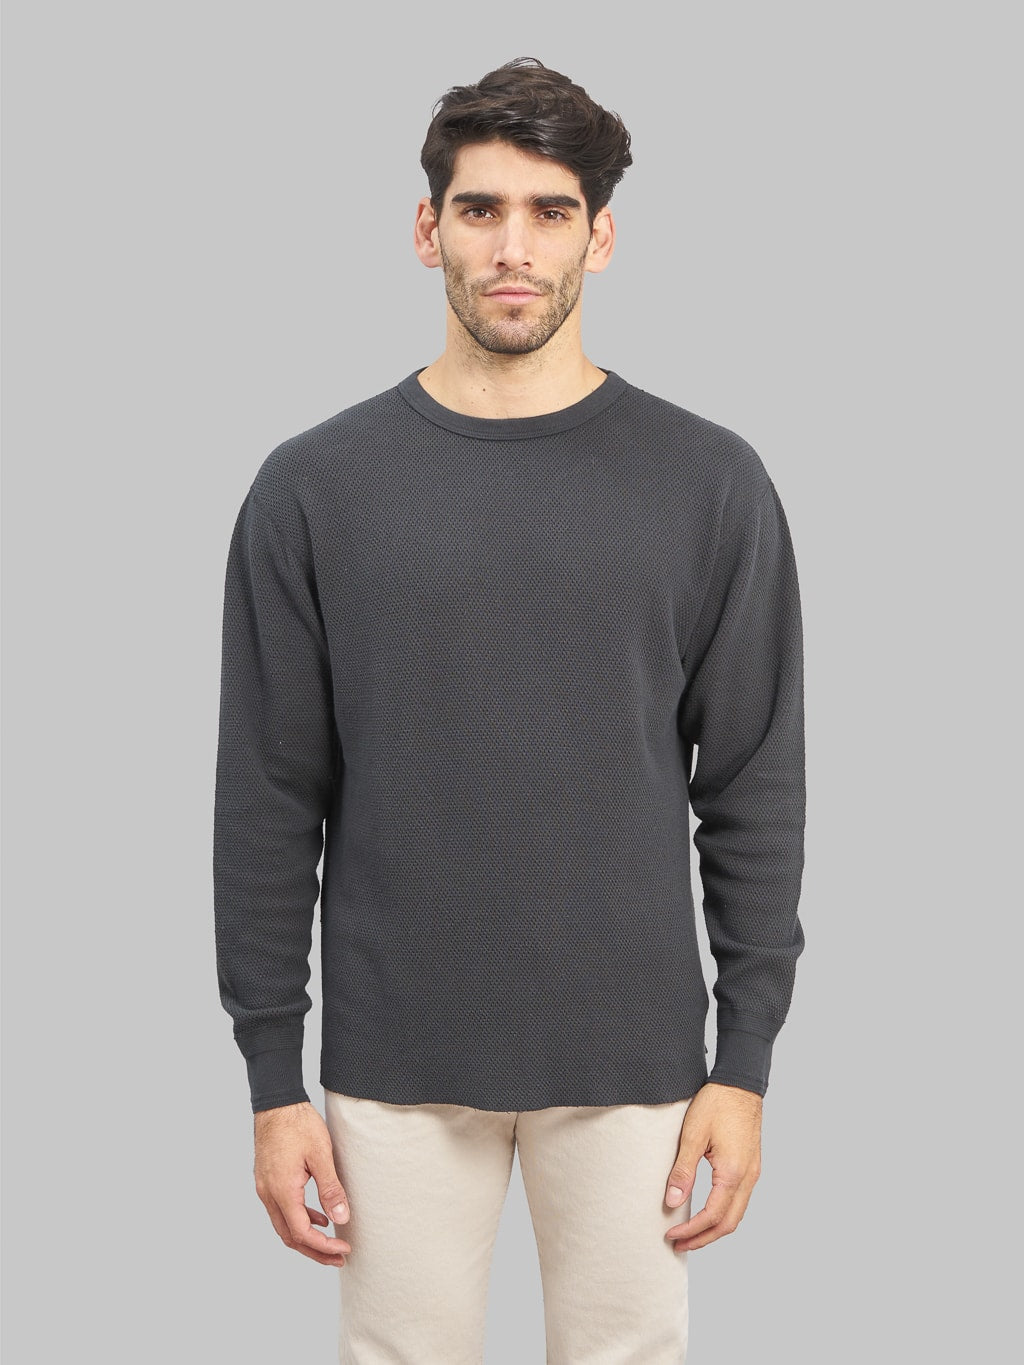 Loop & Weft Double Face Hex Honeycomb Crewneck Thermal Antique Black